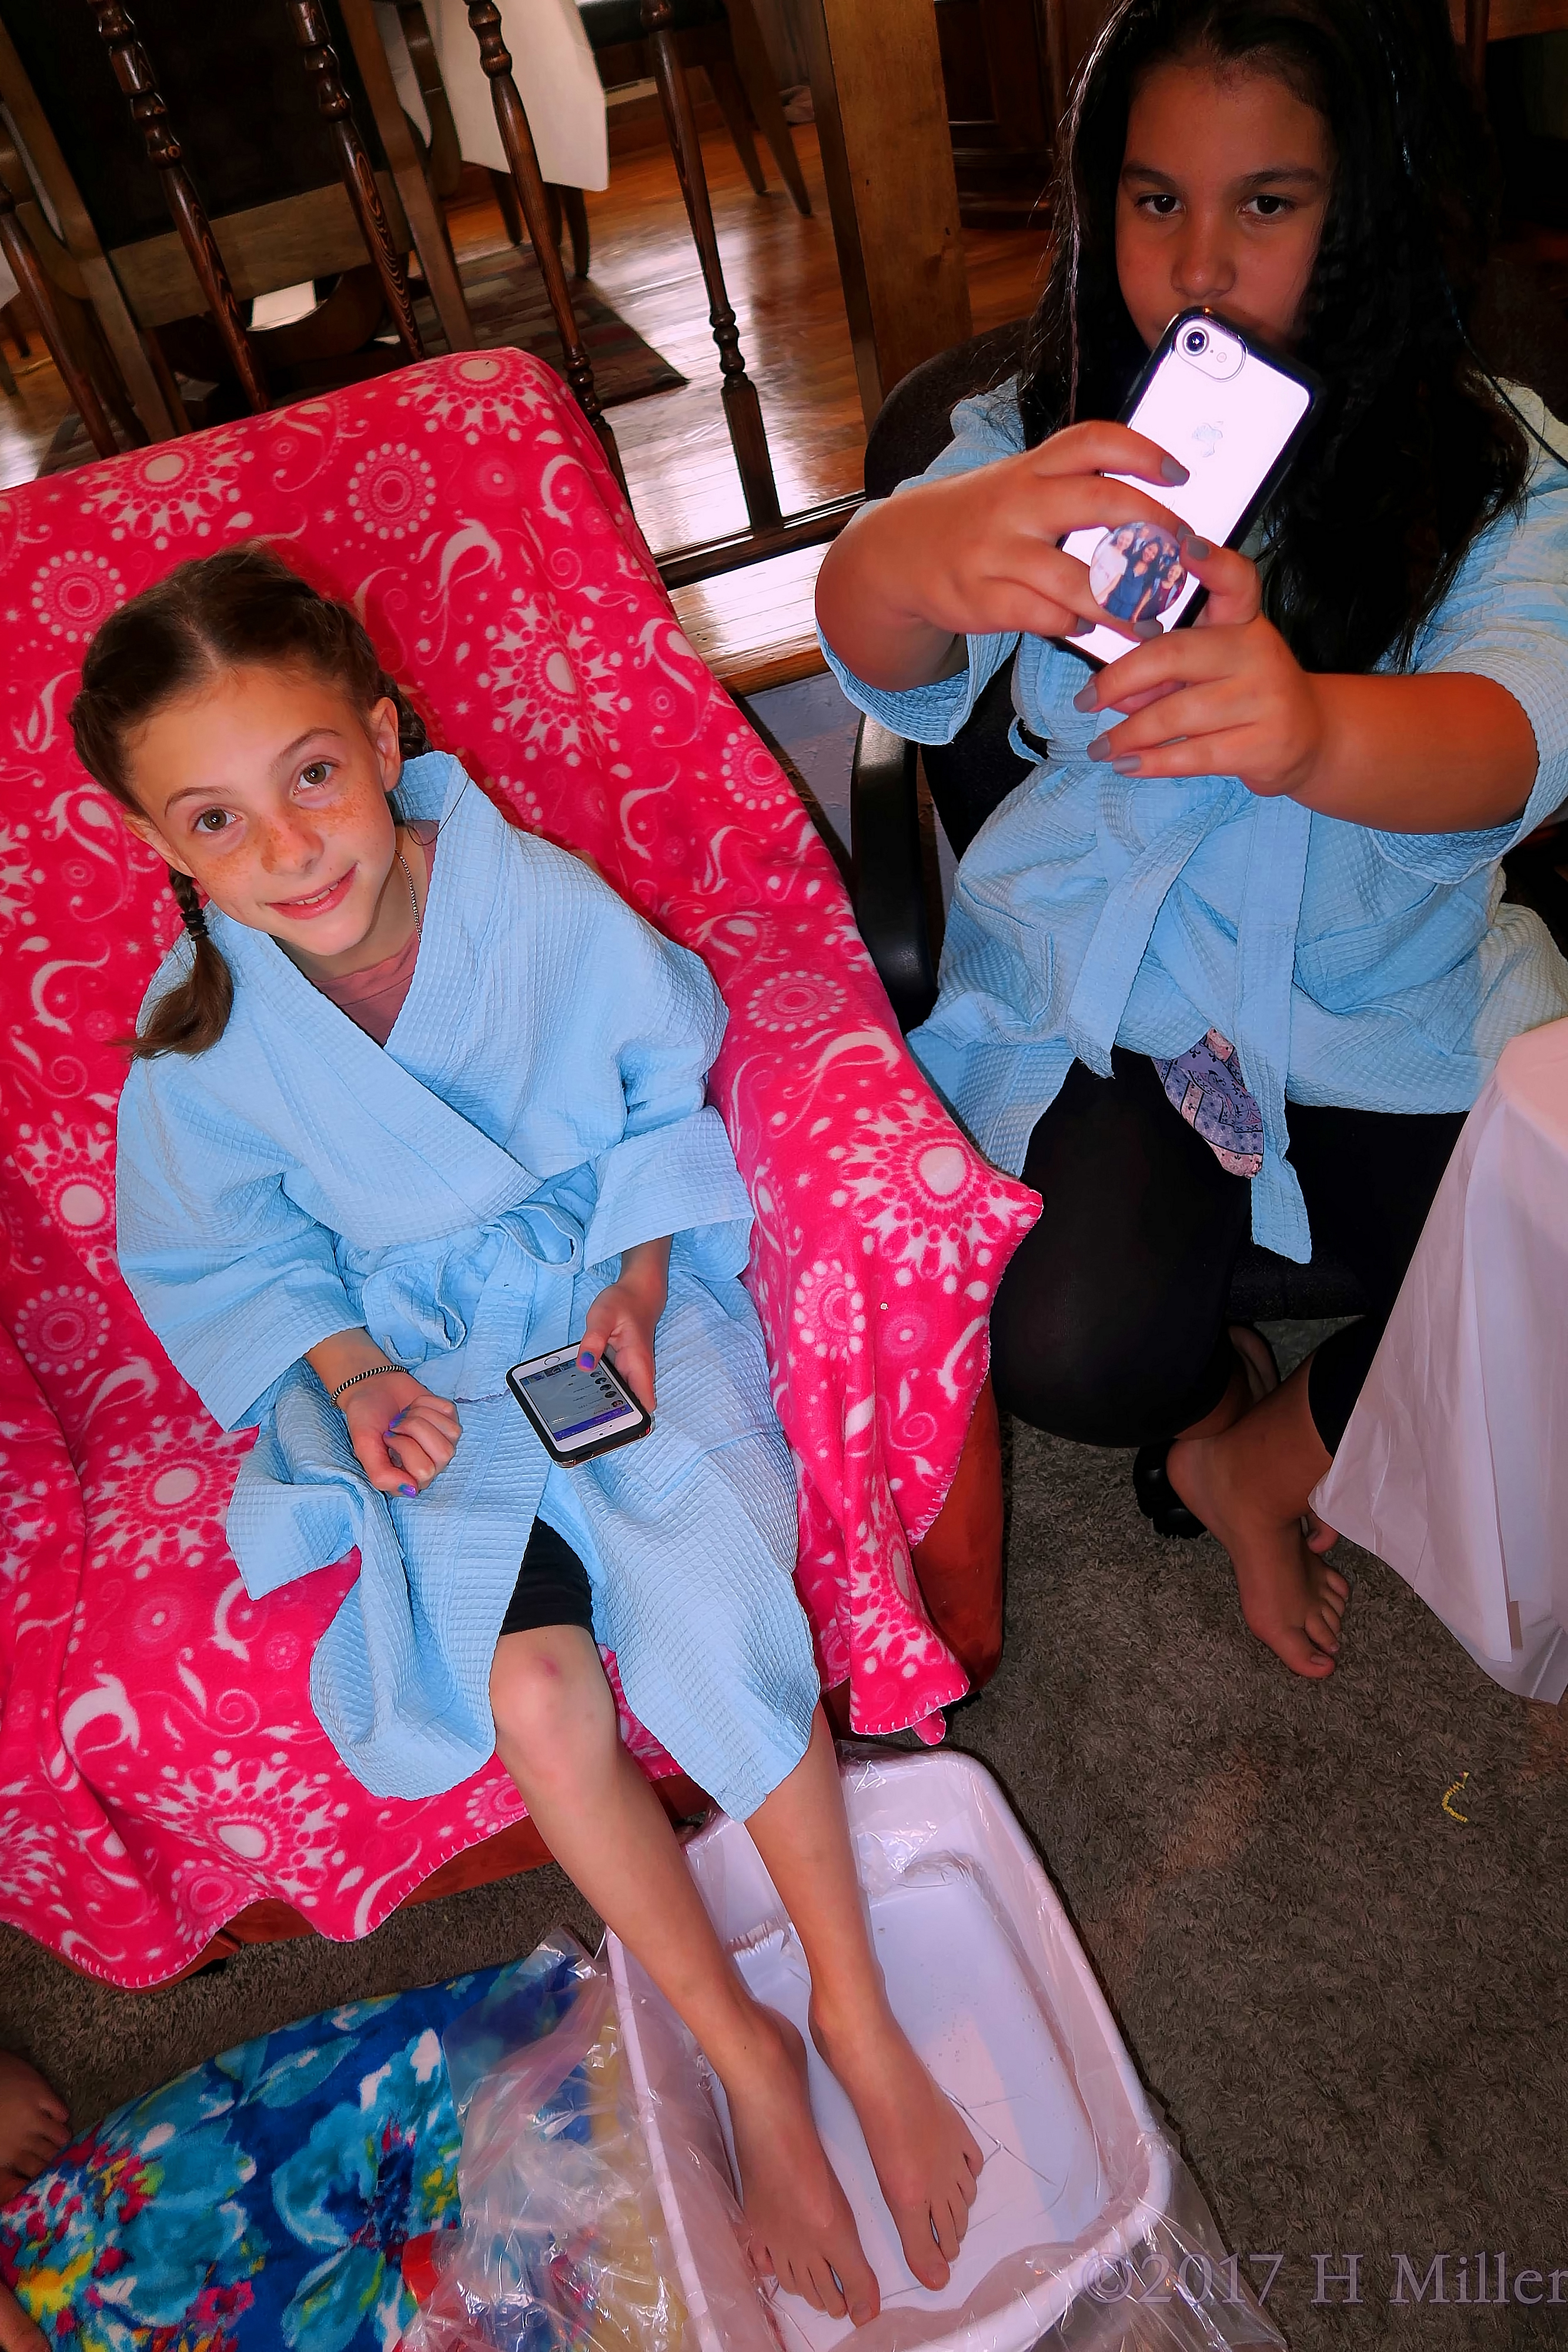 The Birthday Girl Clicks A Selfie During The Kids Pedicure Activity 